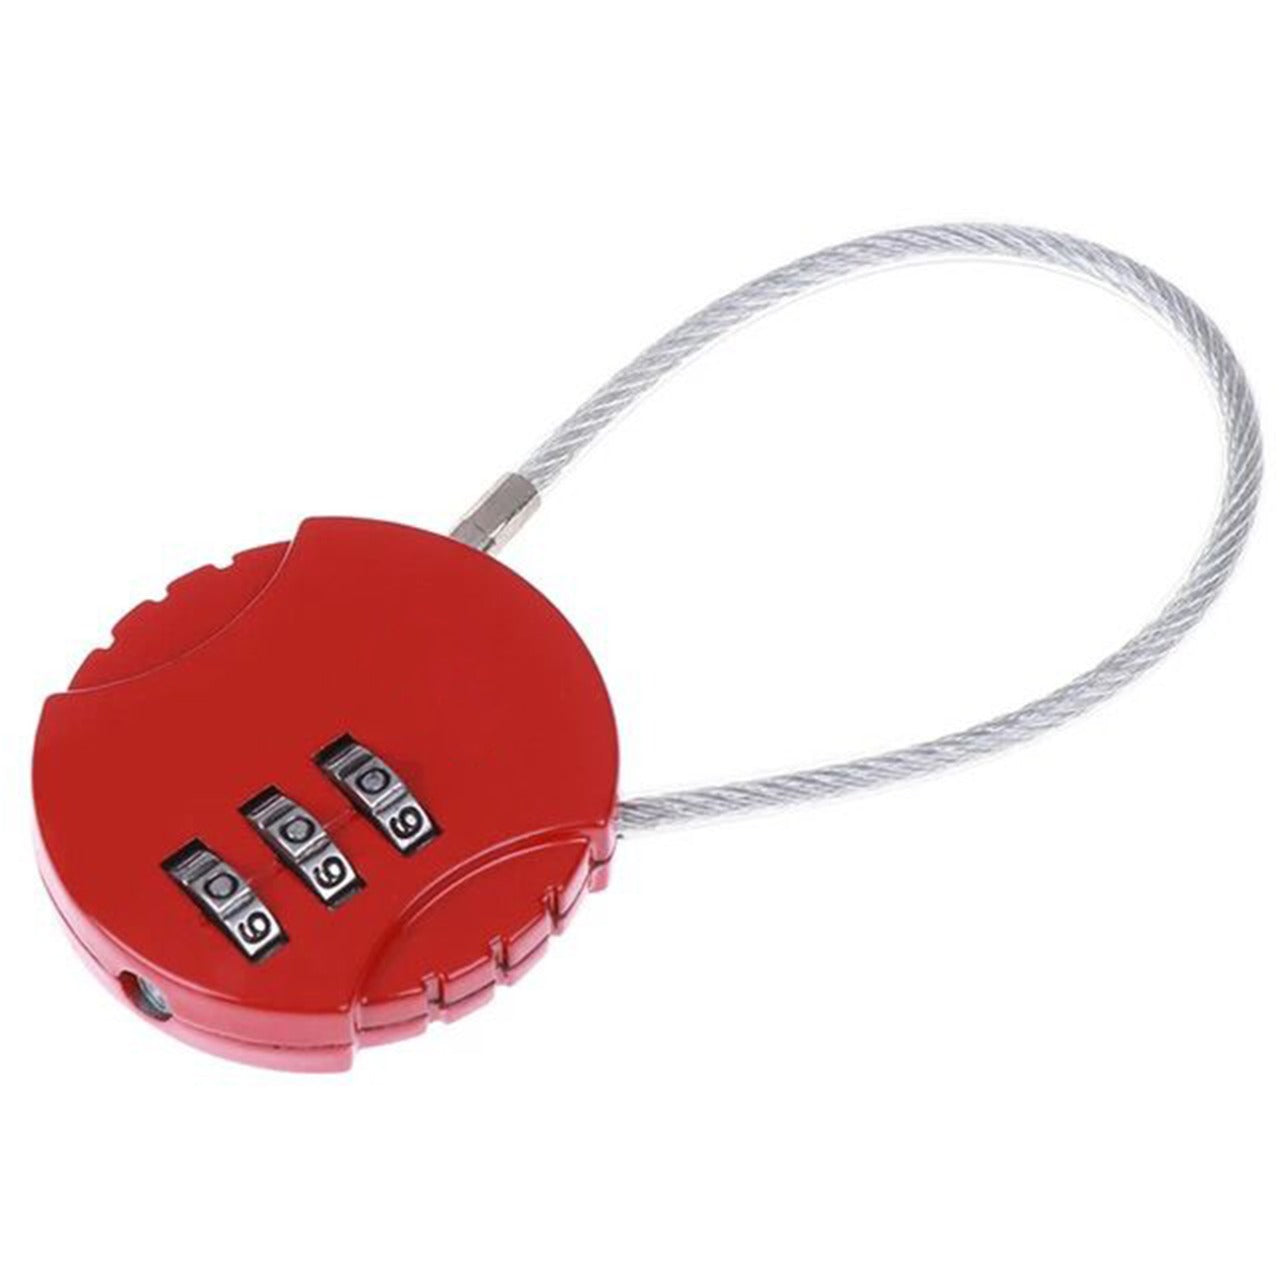 3 Digit Combination Cable Lock for Travel Luggage